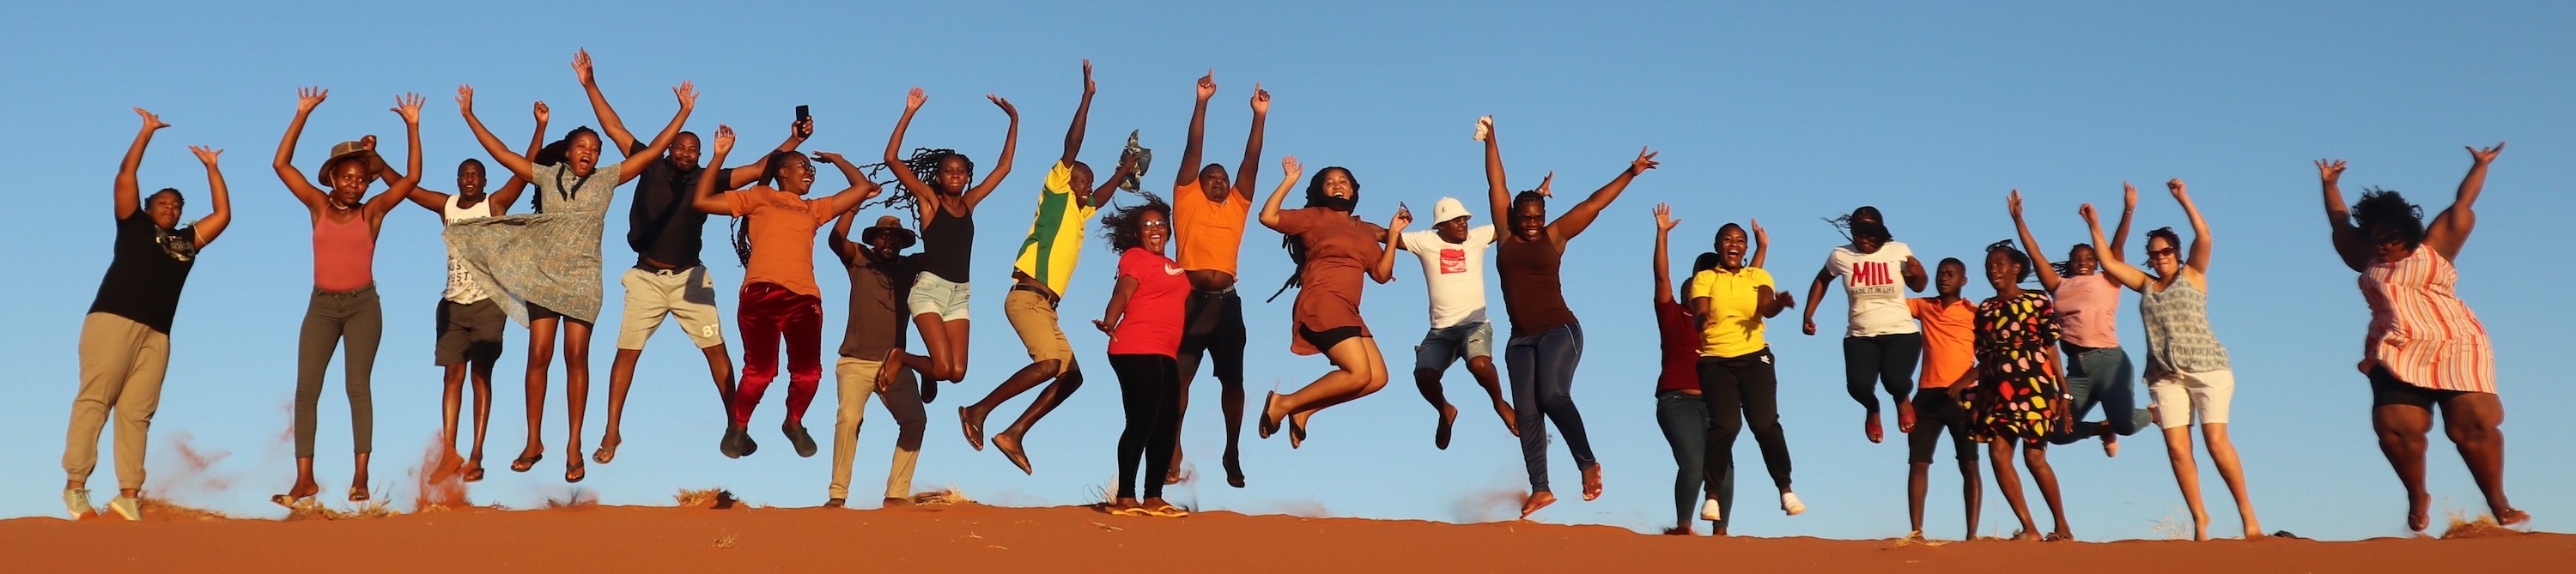 A long line of teachers jumping for joy on top of a sand dune.